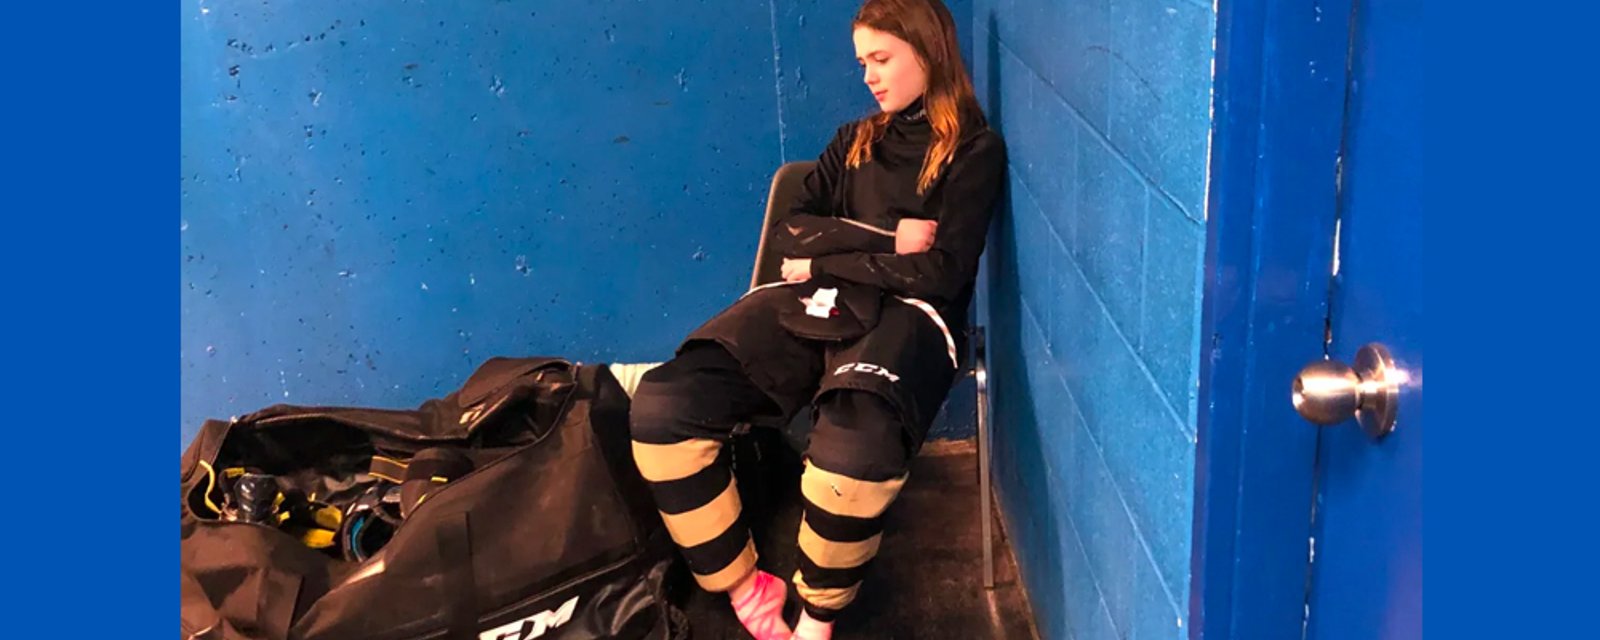 12-year-old girl banned from Saskatchewan Hockey over dressing room dispute